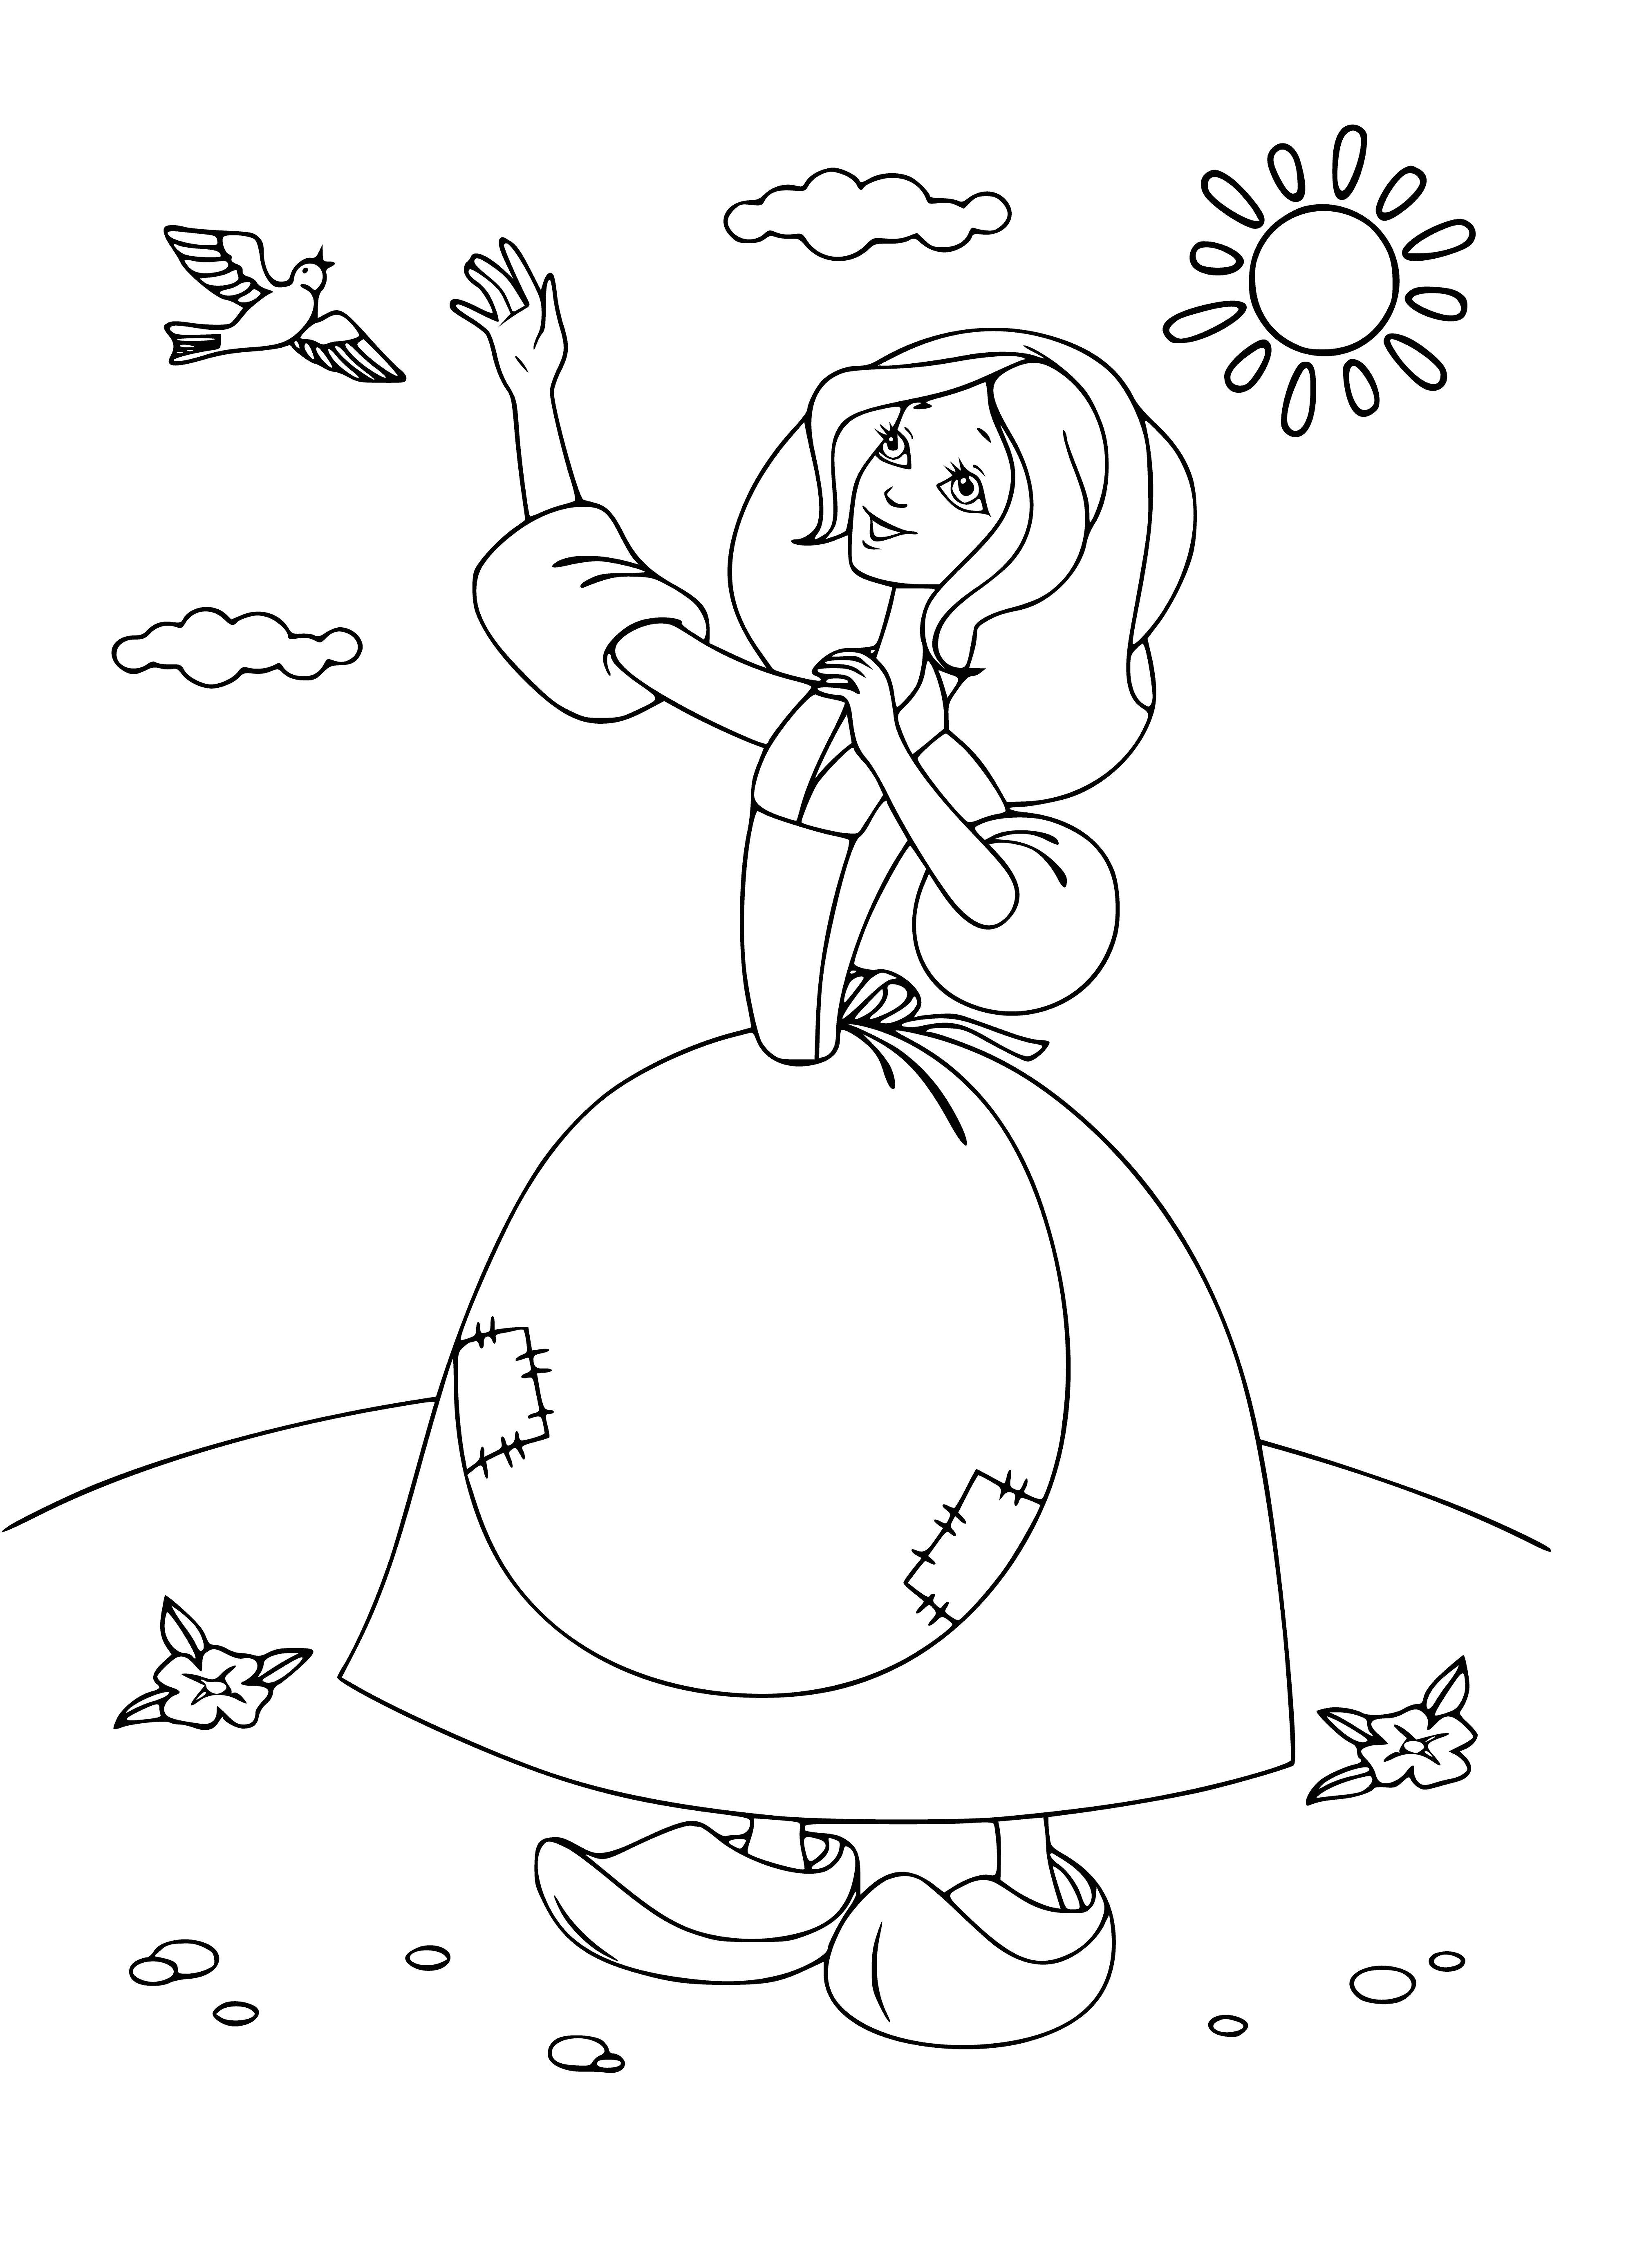 coloring page: Cinderella rejoices in nature's beauty with bare feet & wind-blown hair, beaming a carefree happiness.